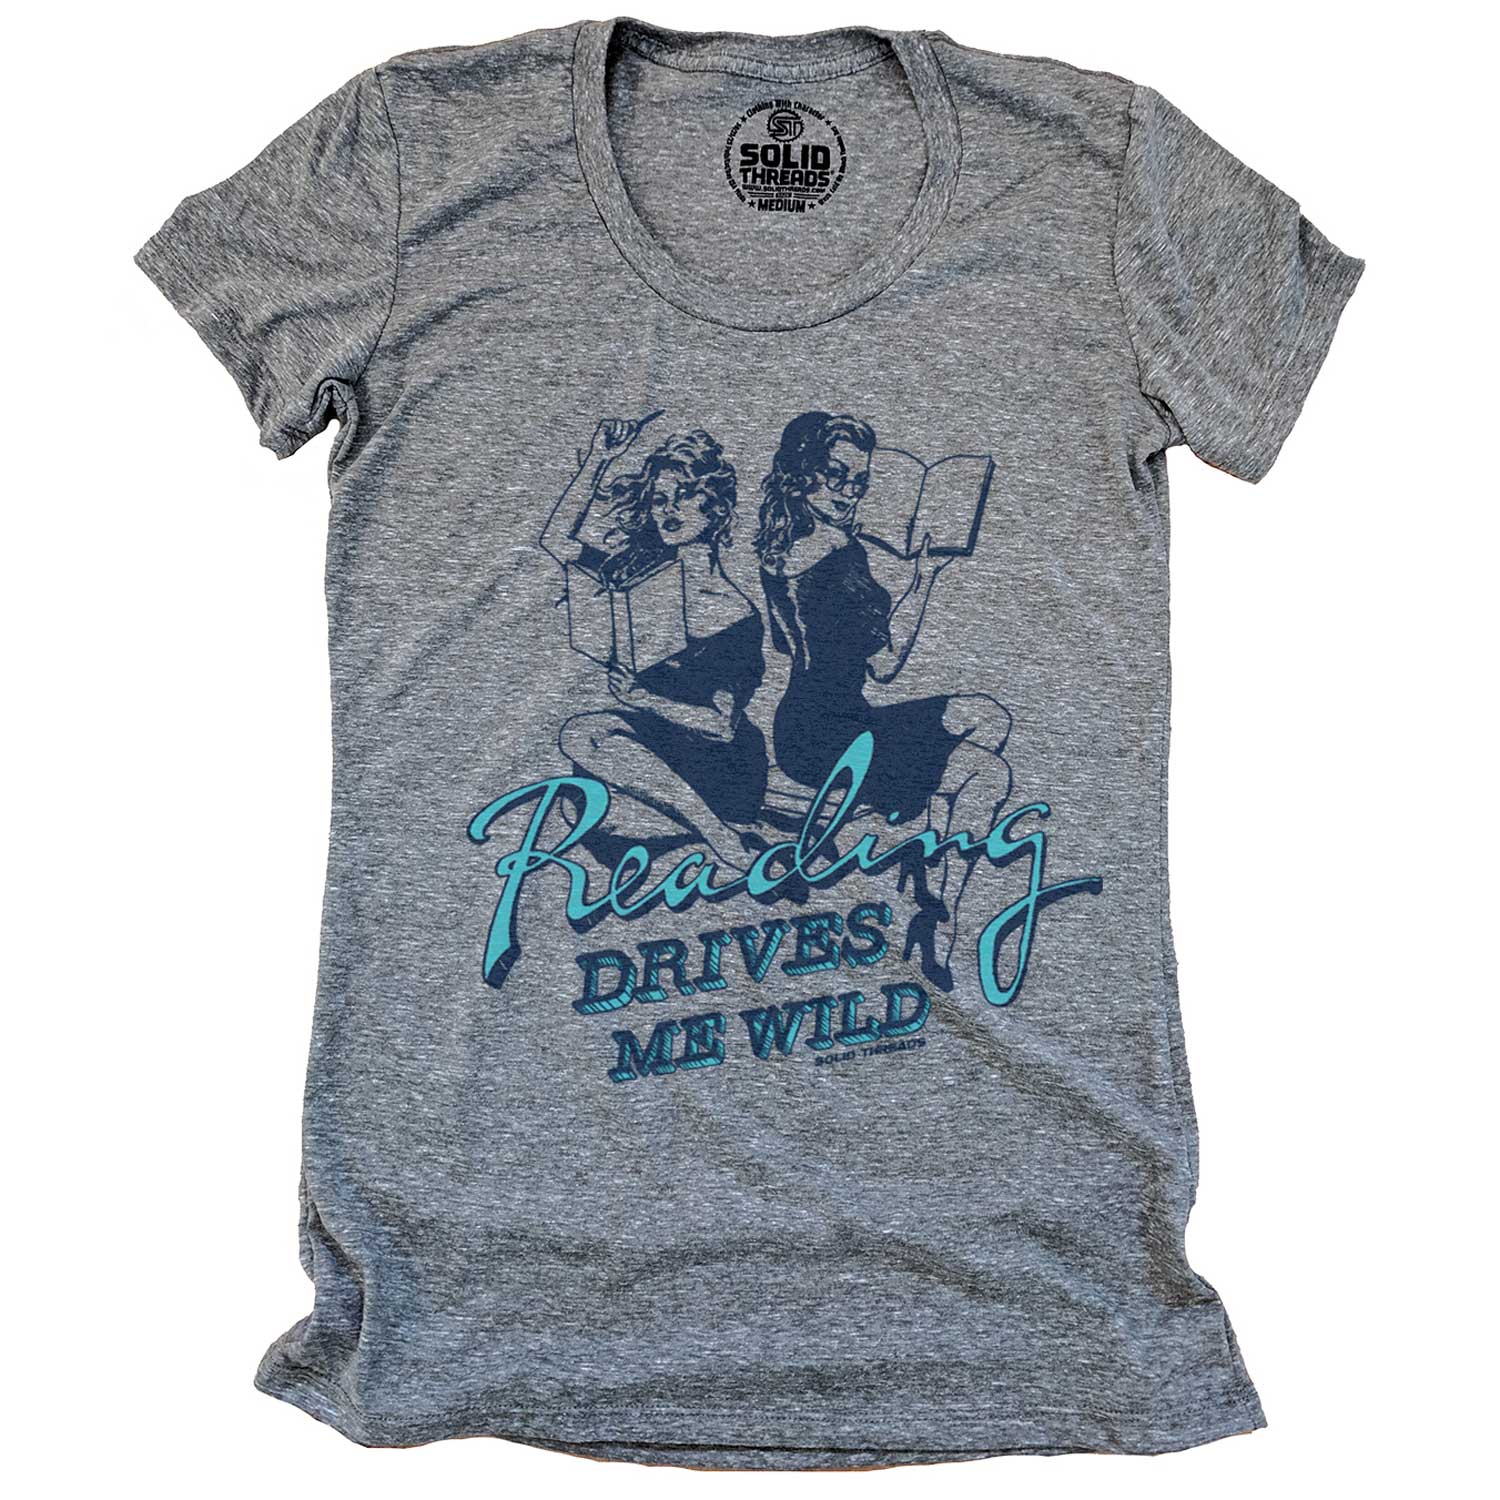 https://cdn.shopify.com/s/files/1/1670/8045/products/womens_reading_drives_me_wild_vintage_triblend_grey_scoopneck_tee_shirt_cool_funny_retro_librarian_graphic_1600x.jpg?v=1618522654